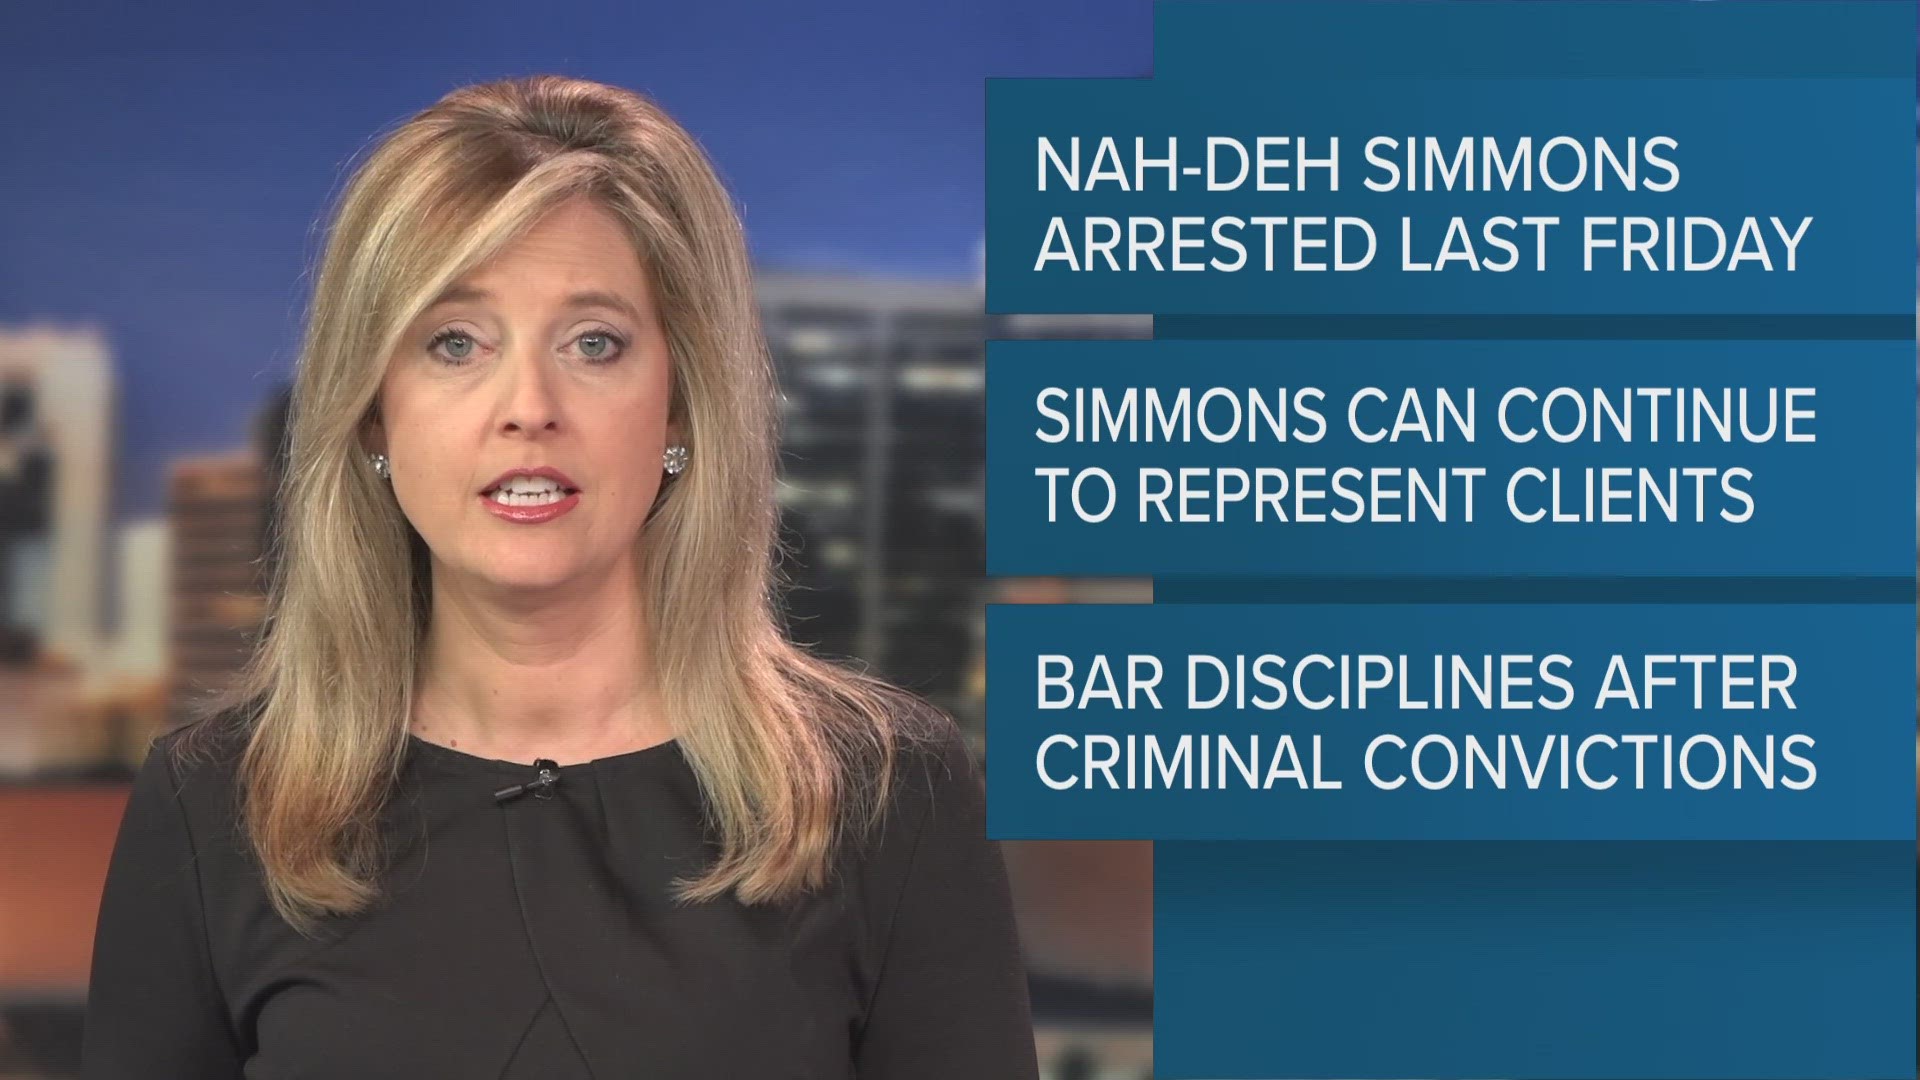 The Florida Bar has opened an investigation into Nah-Deh Simmons after his arrest for soliciting perjury in a murder case. For now, he continues to practice.